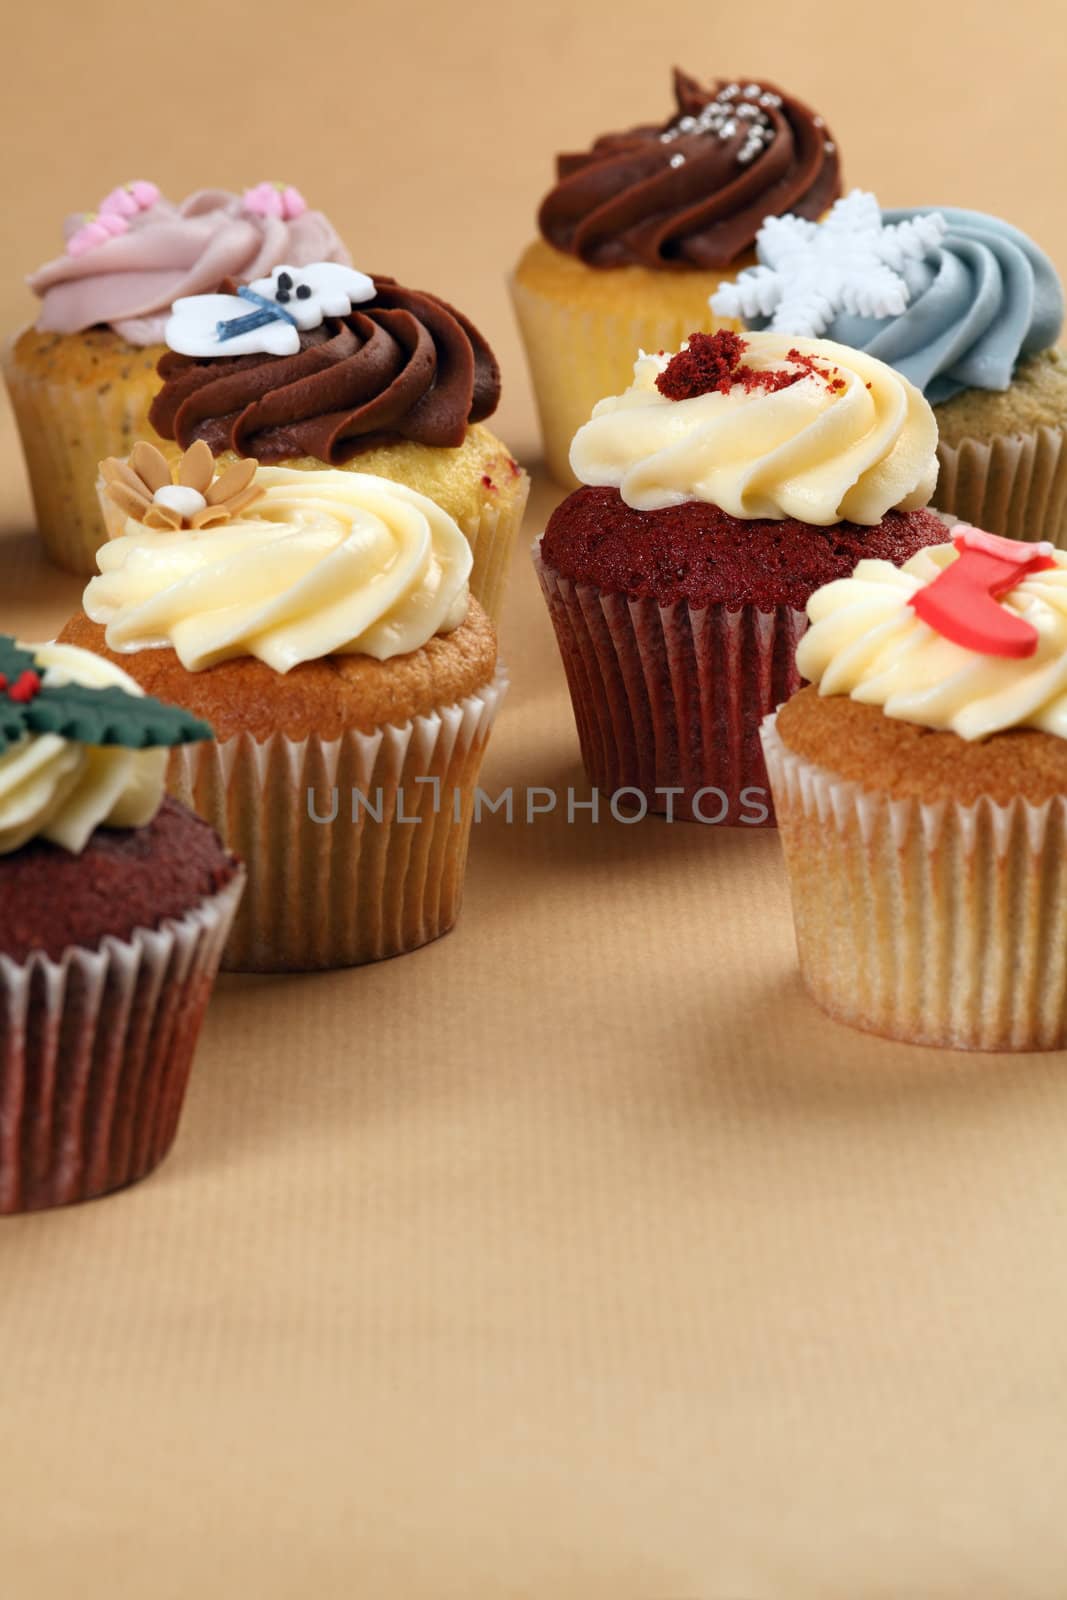 Photo of different flavoured cupcakes on a table.
